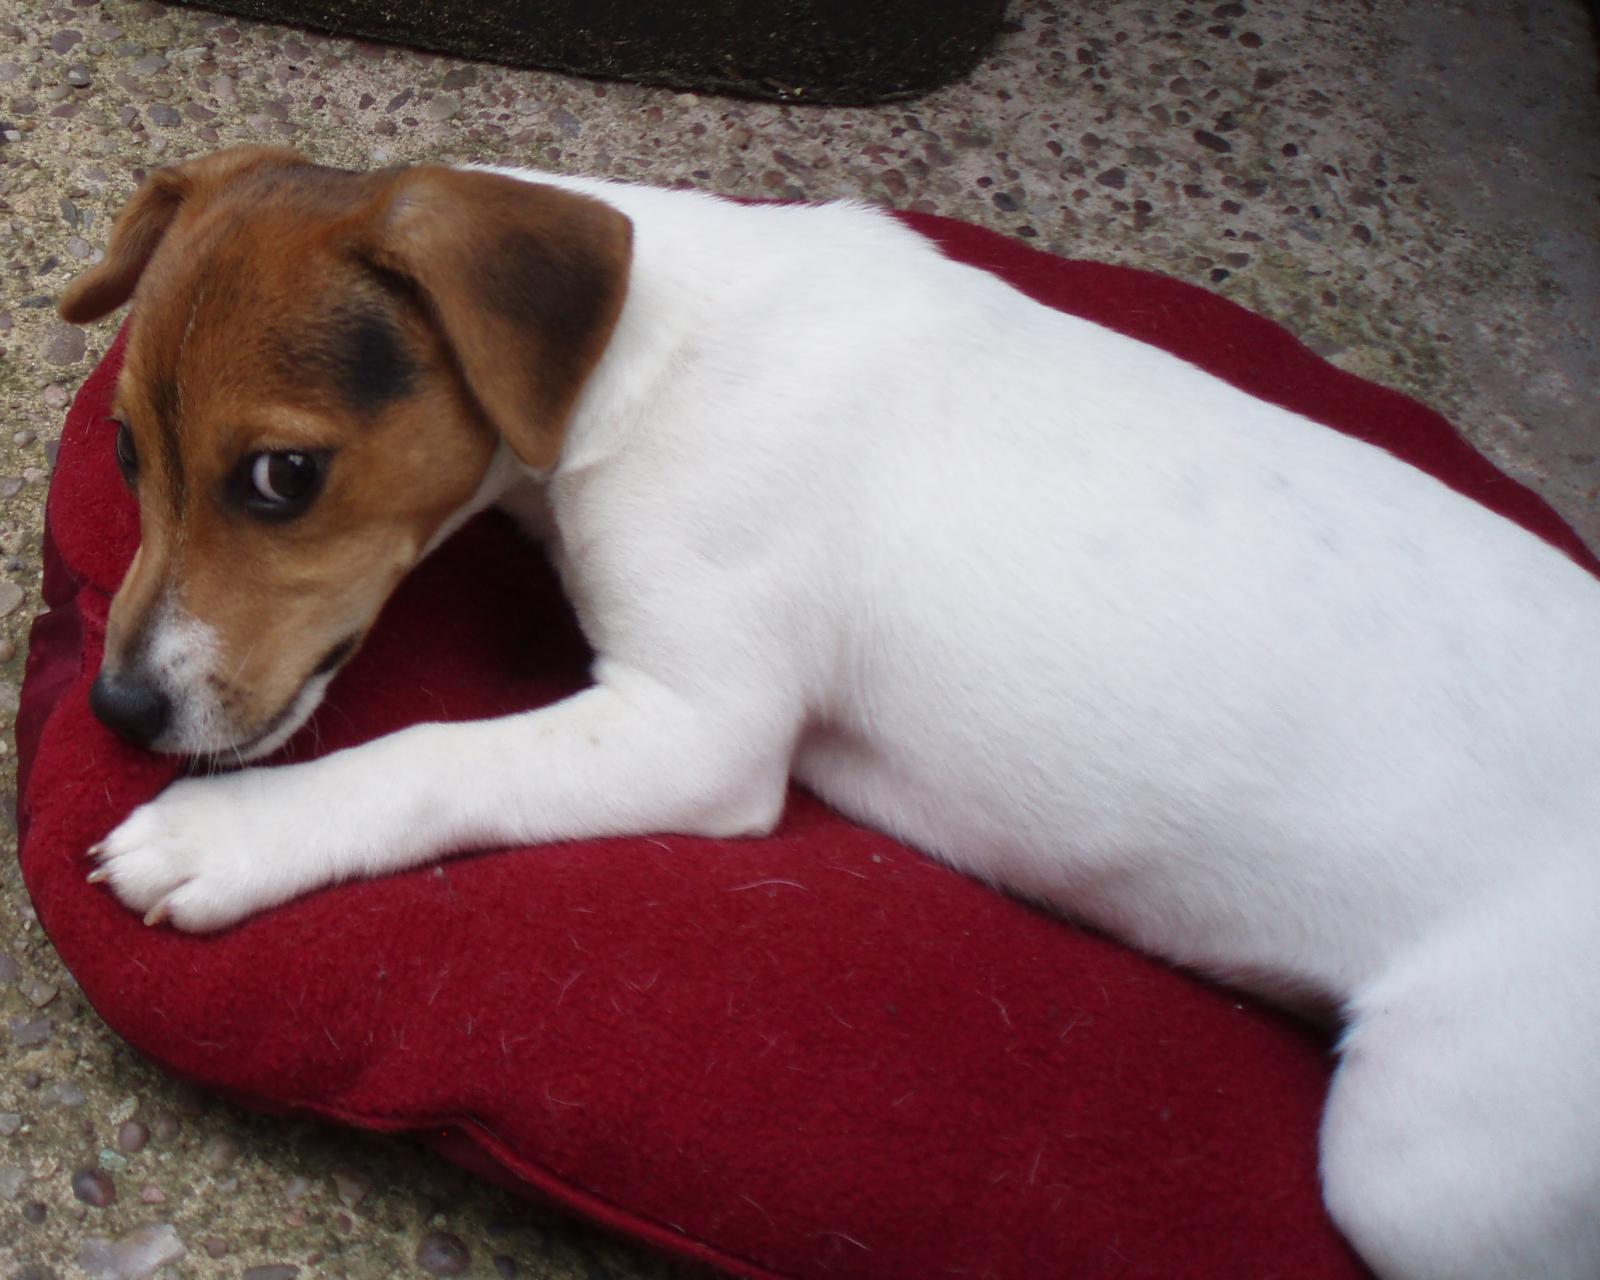 a brown and white dog is laying on red cushion